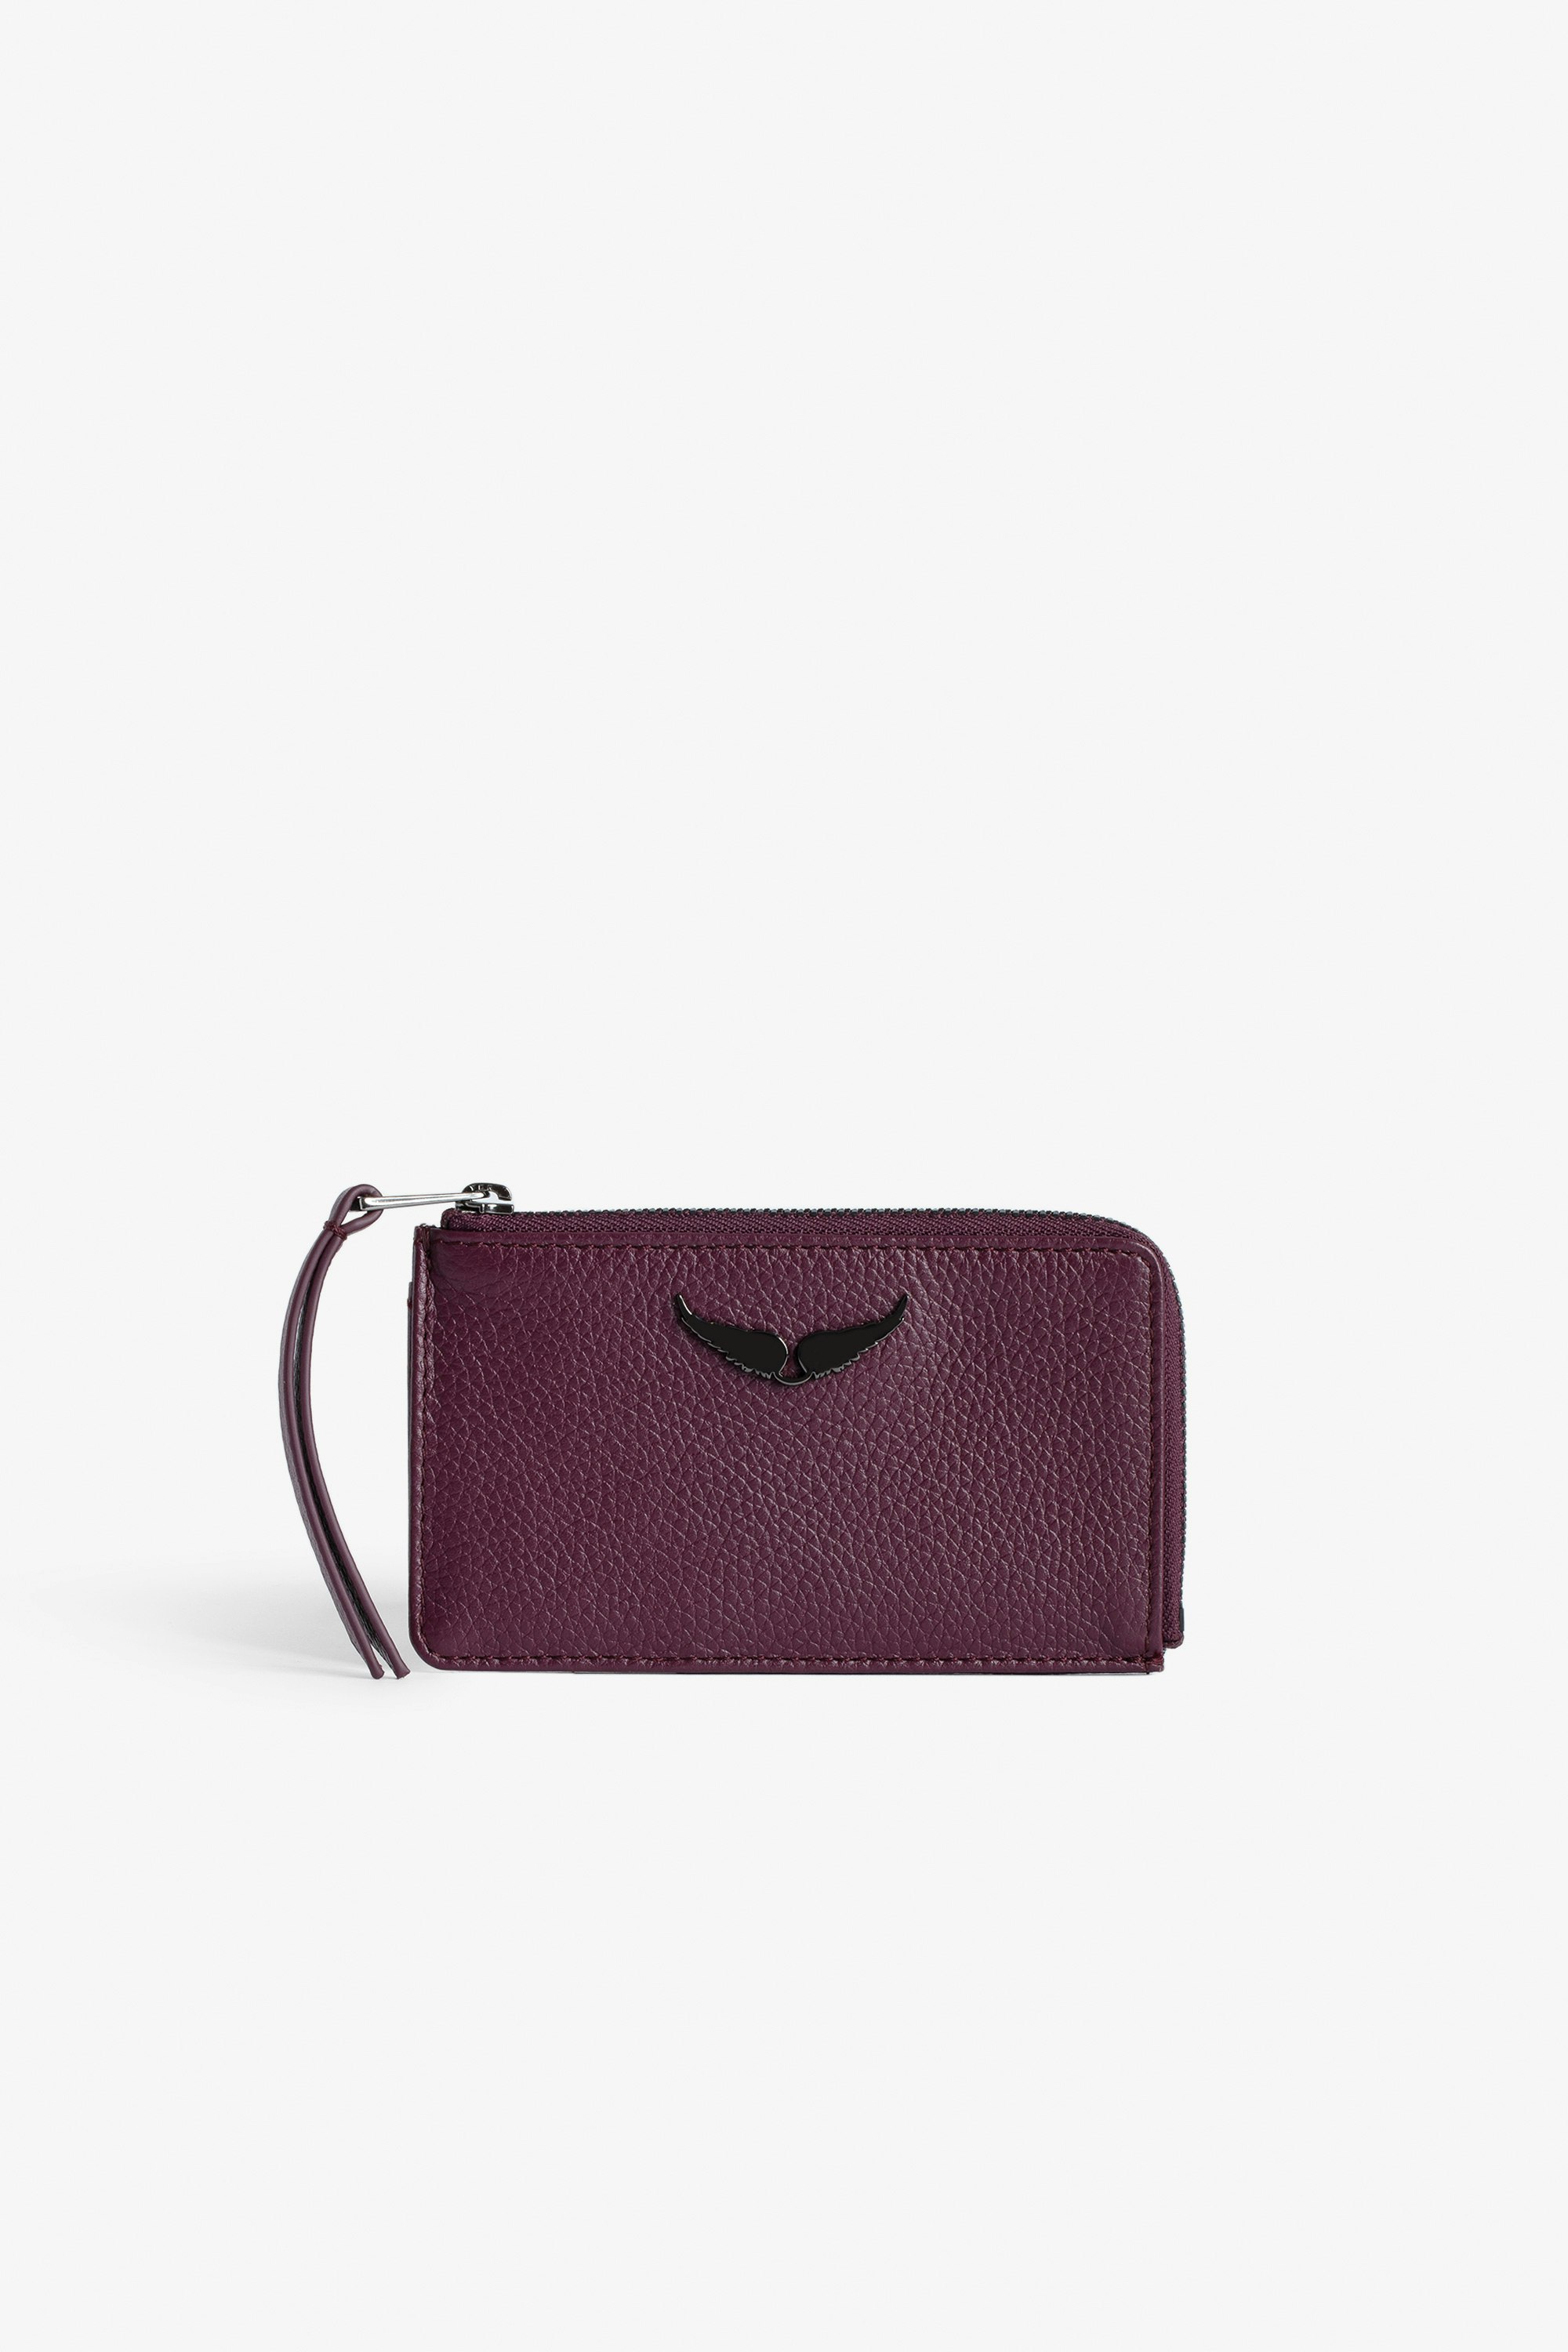 ZV Card 財布 - Women’s burgundy grained leather card holder with wings charm.